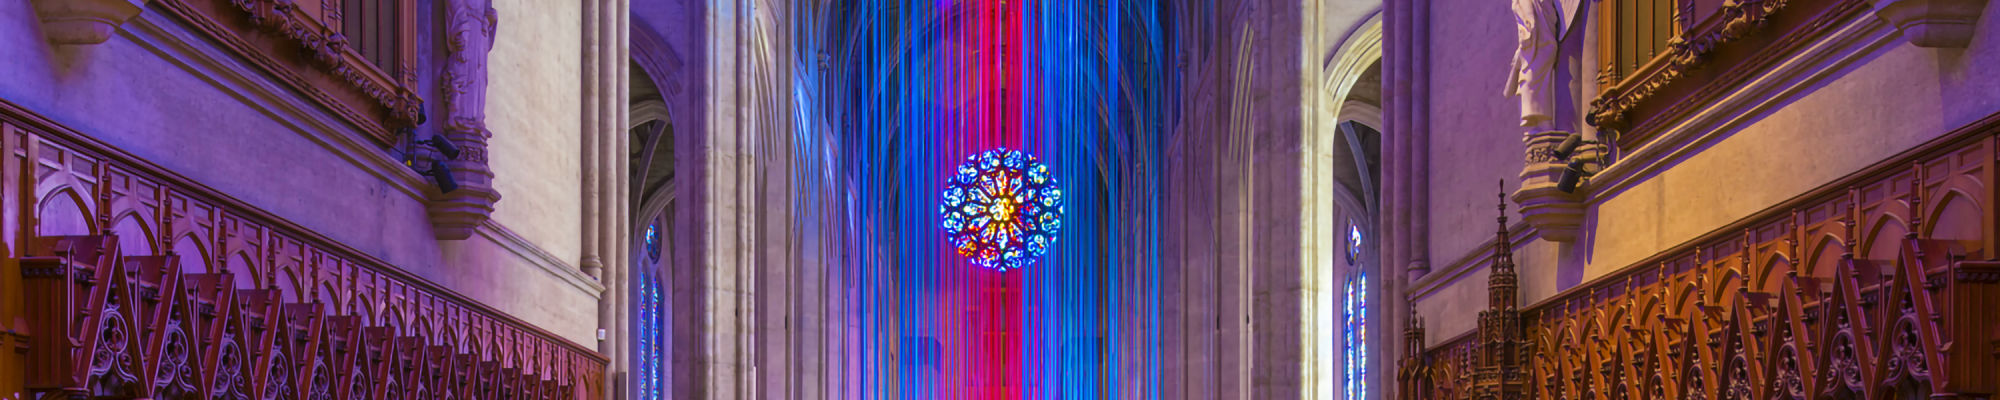 Grace Cathedral by permission of David Yu